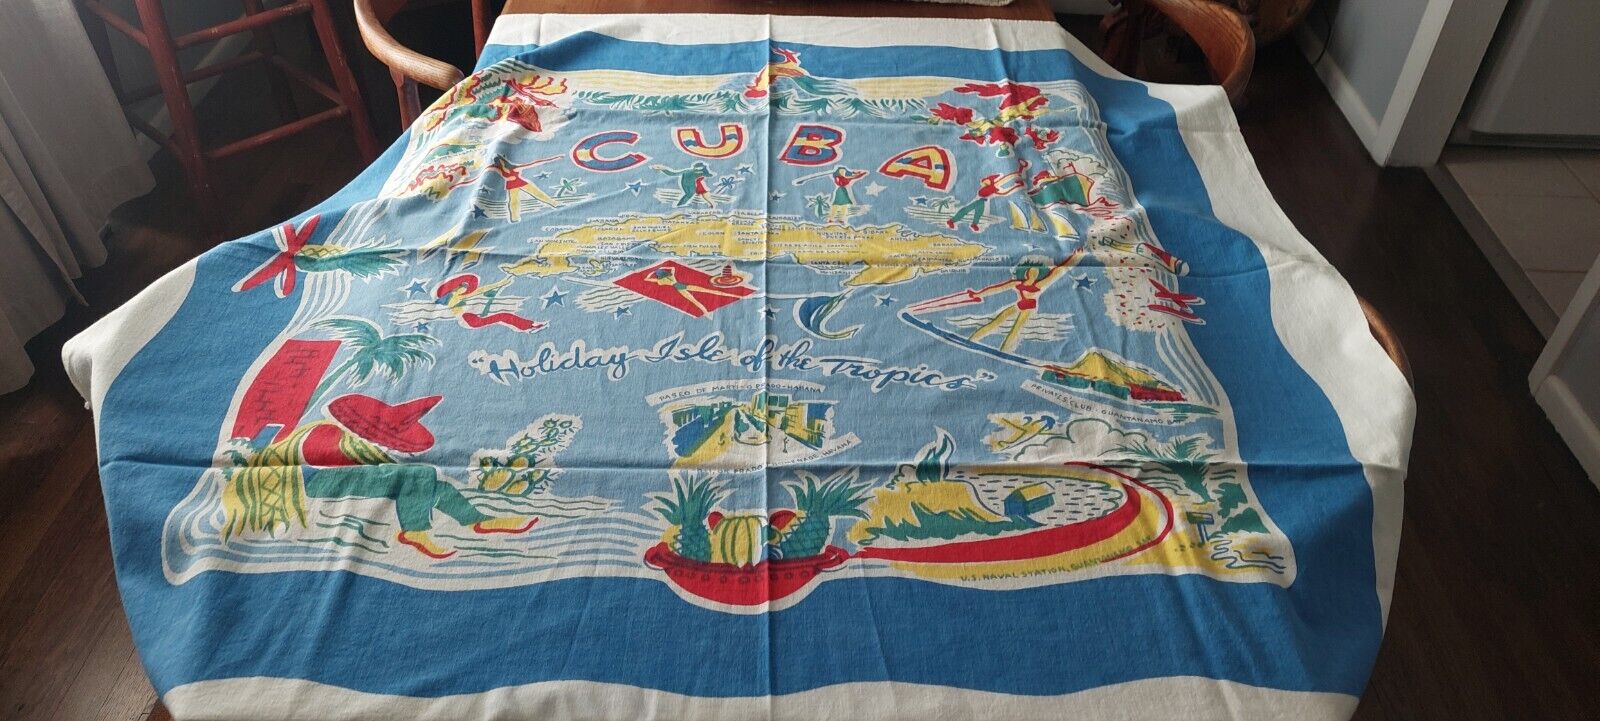 Vintage Cotton Colorful Map of Cuba Cotton Tablecloth Many Graphics 48x49